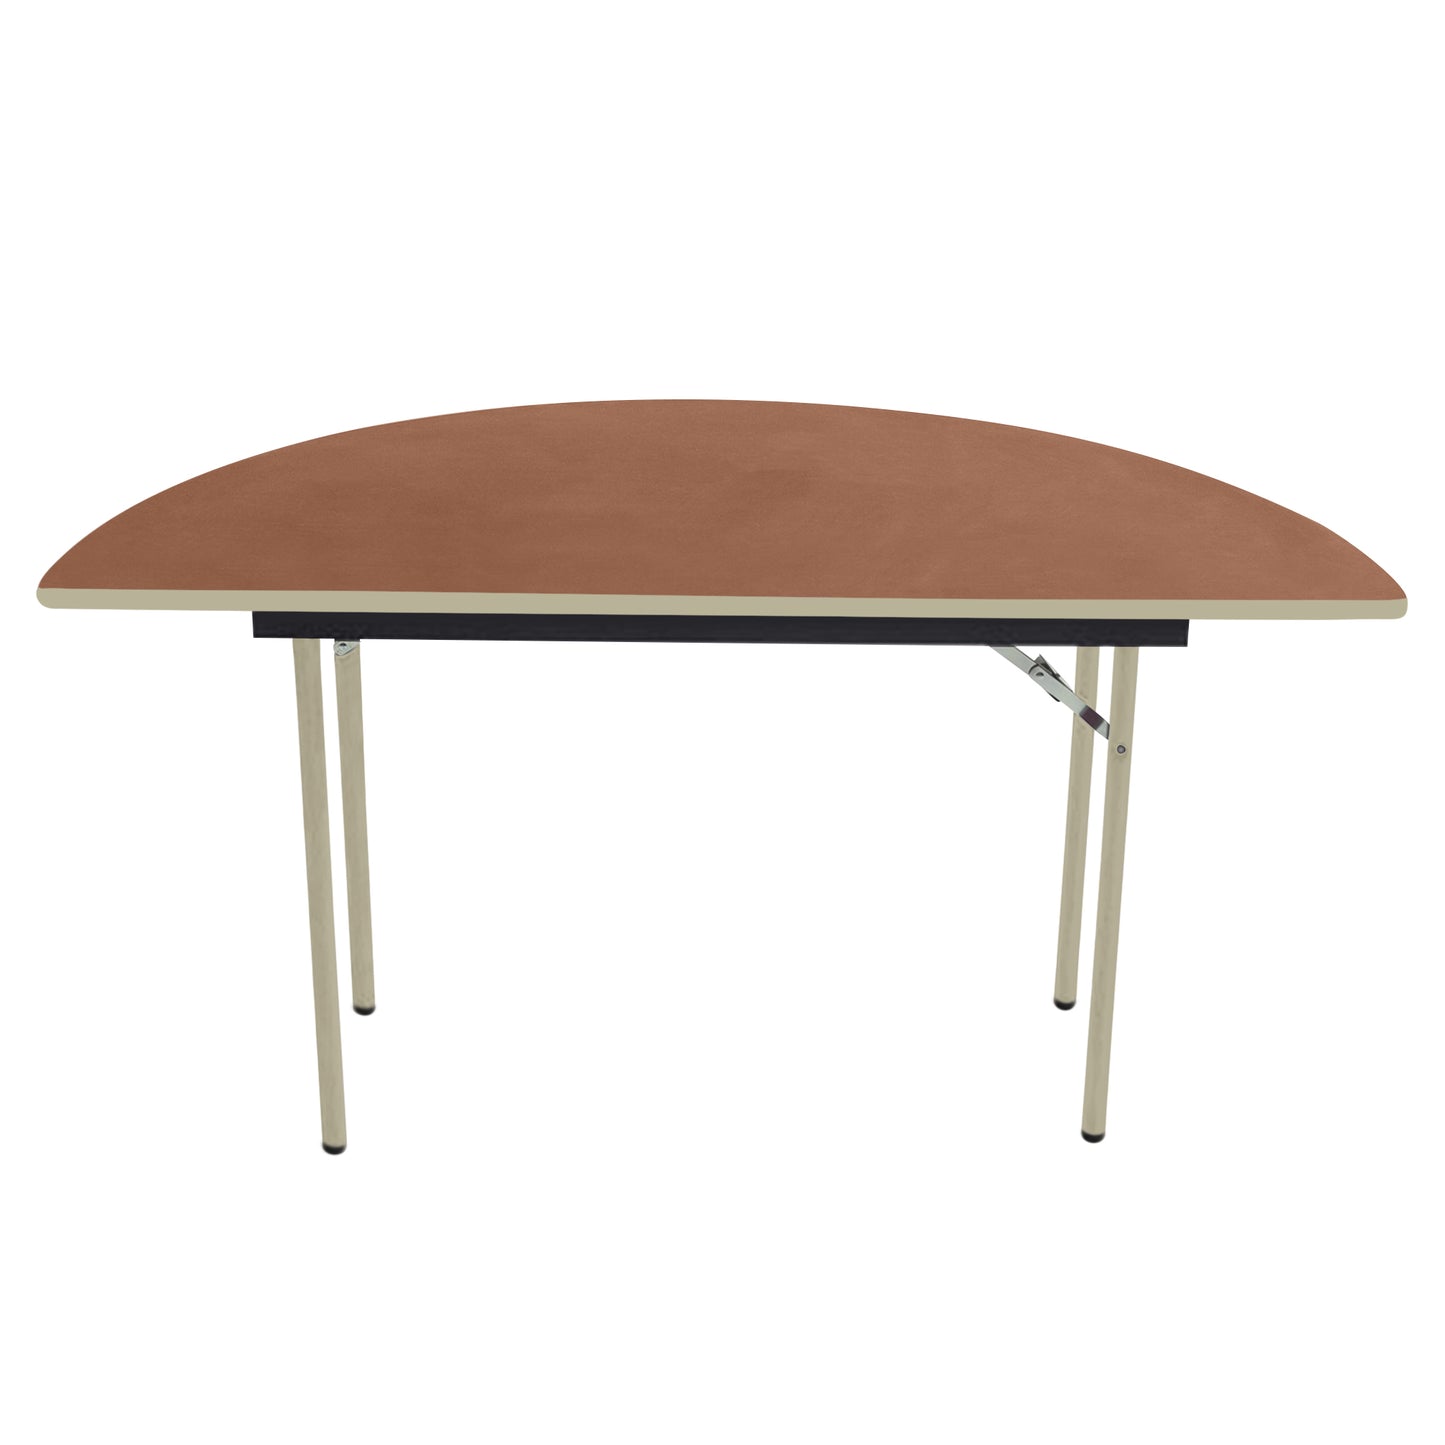 AmTab Folding Table - Plywood Stained and Sealed - Vinyl T-Molding Edge - Half Round - Half 30" Diameter x 29"H  (AmTab AMT-HR30PM)